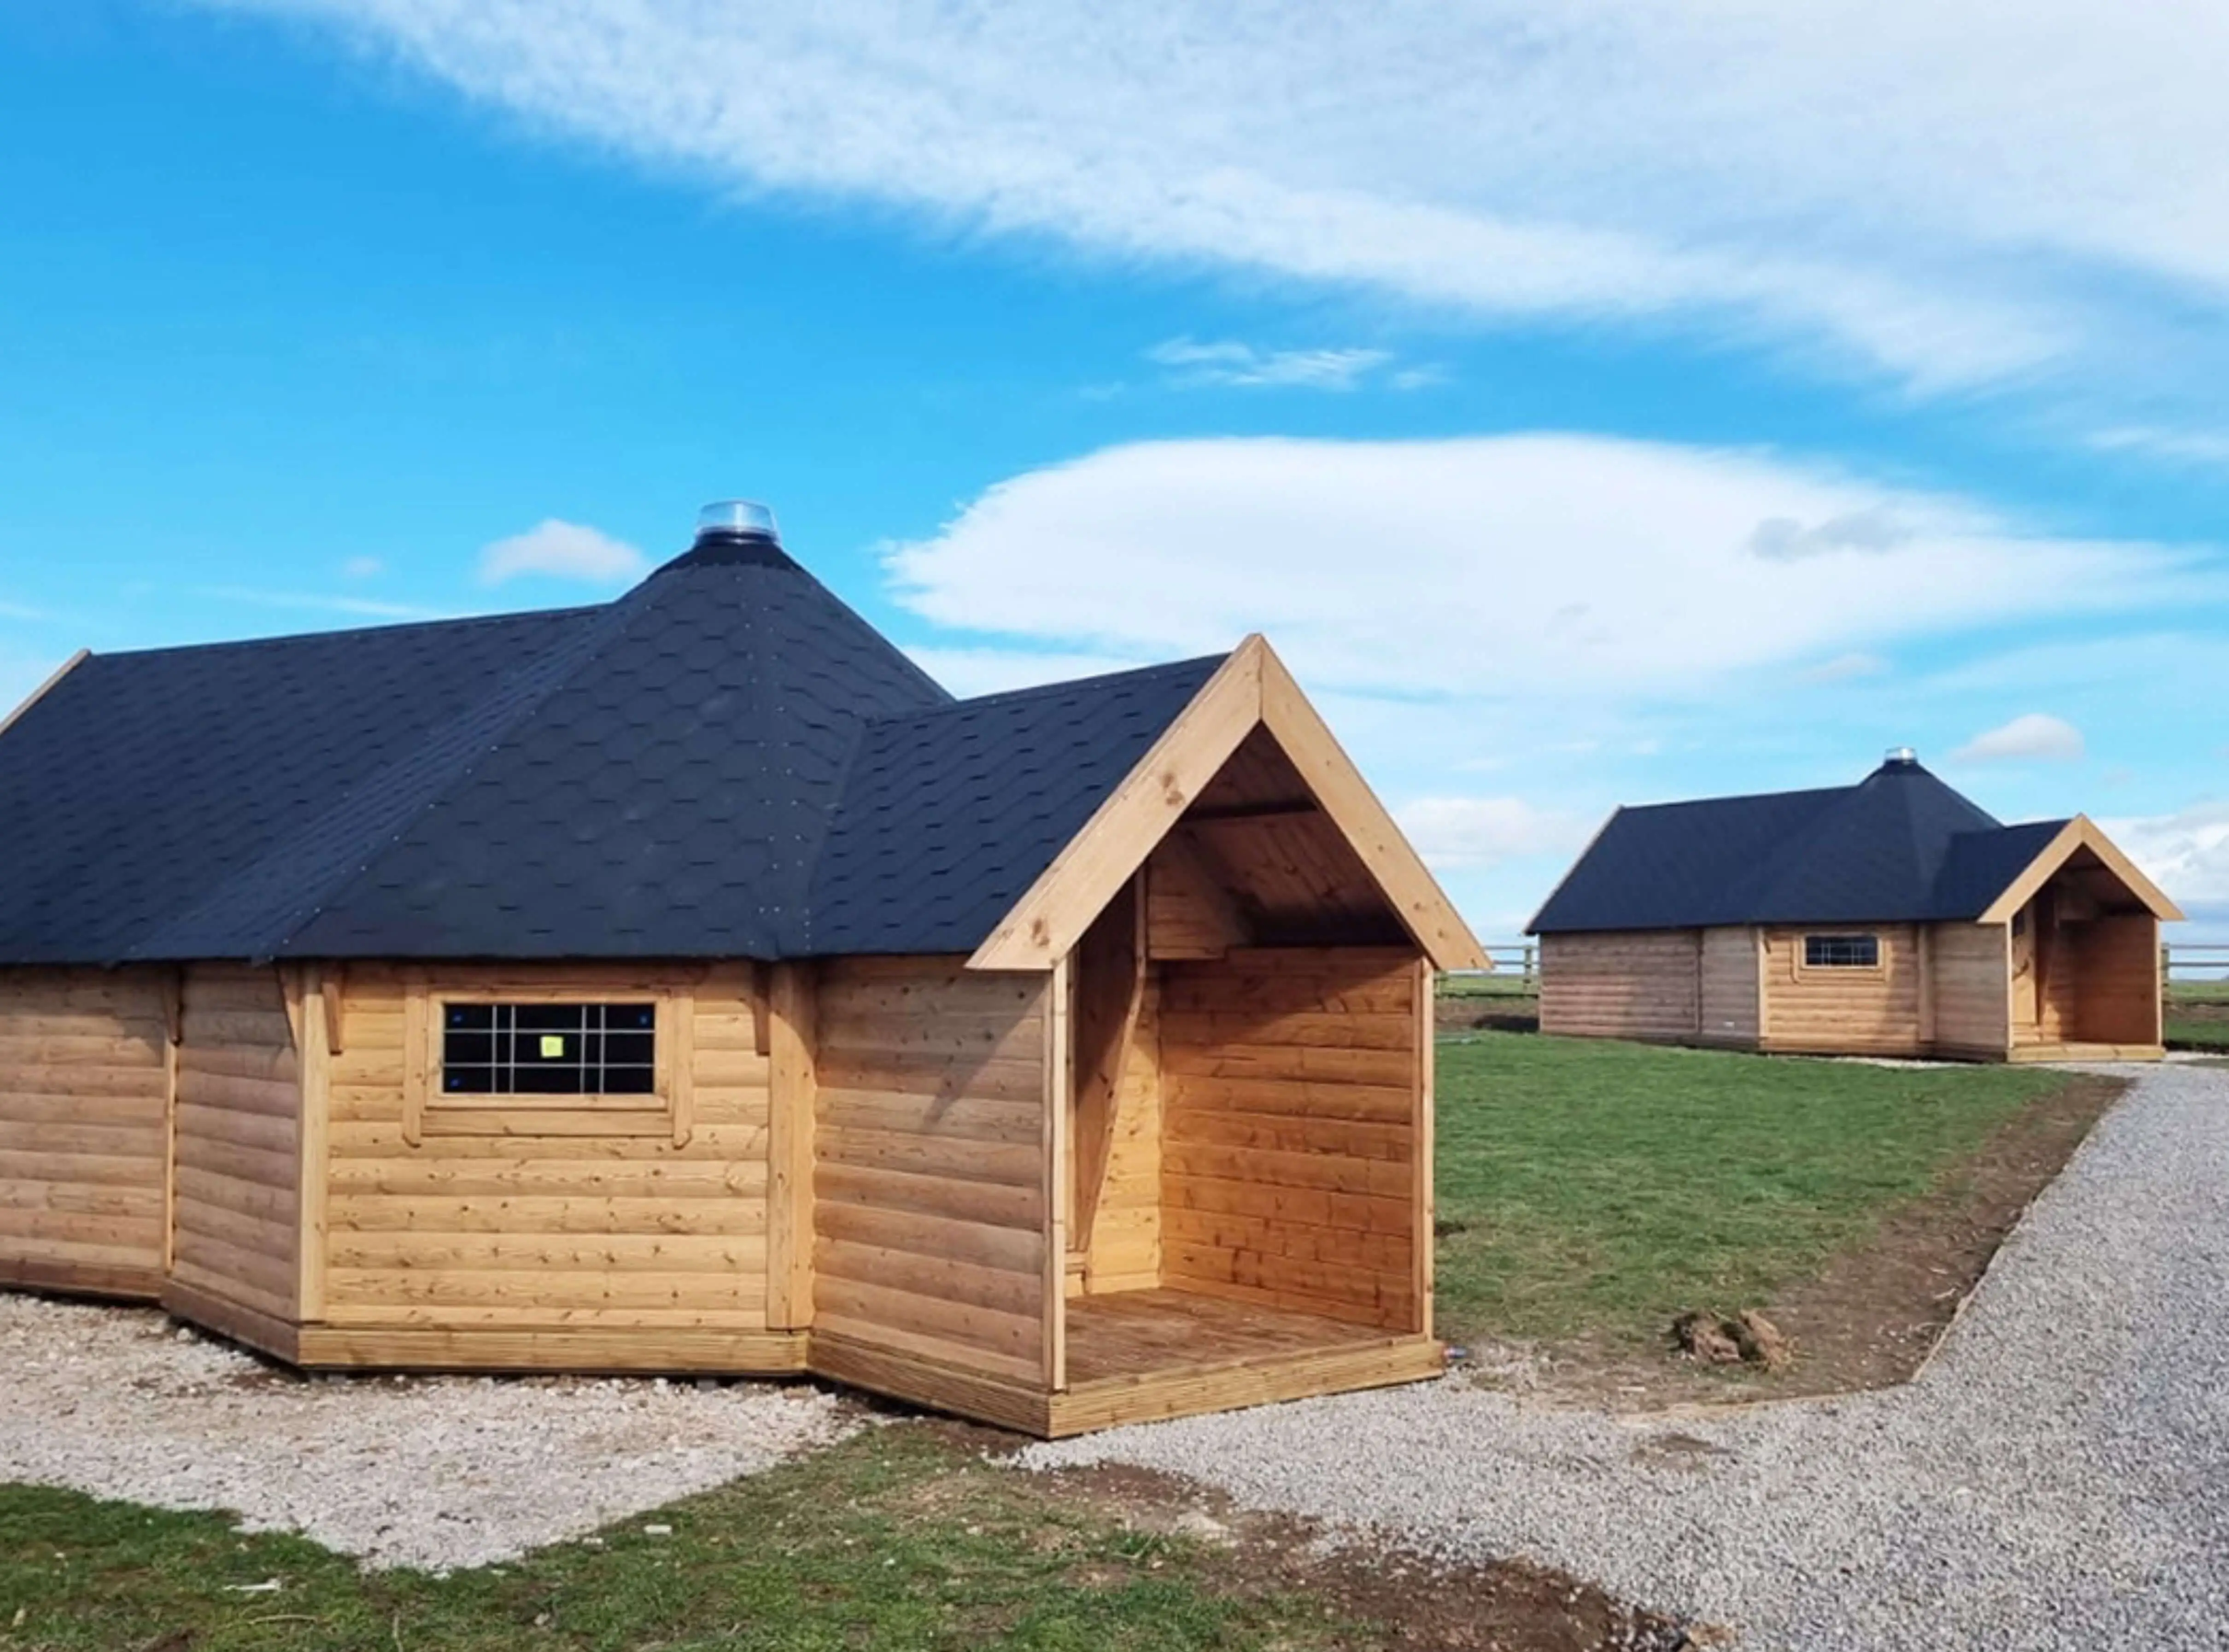 Large Camping Cabins redwood building with black roof tiles and gravel path and grassy area with blue skies